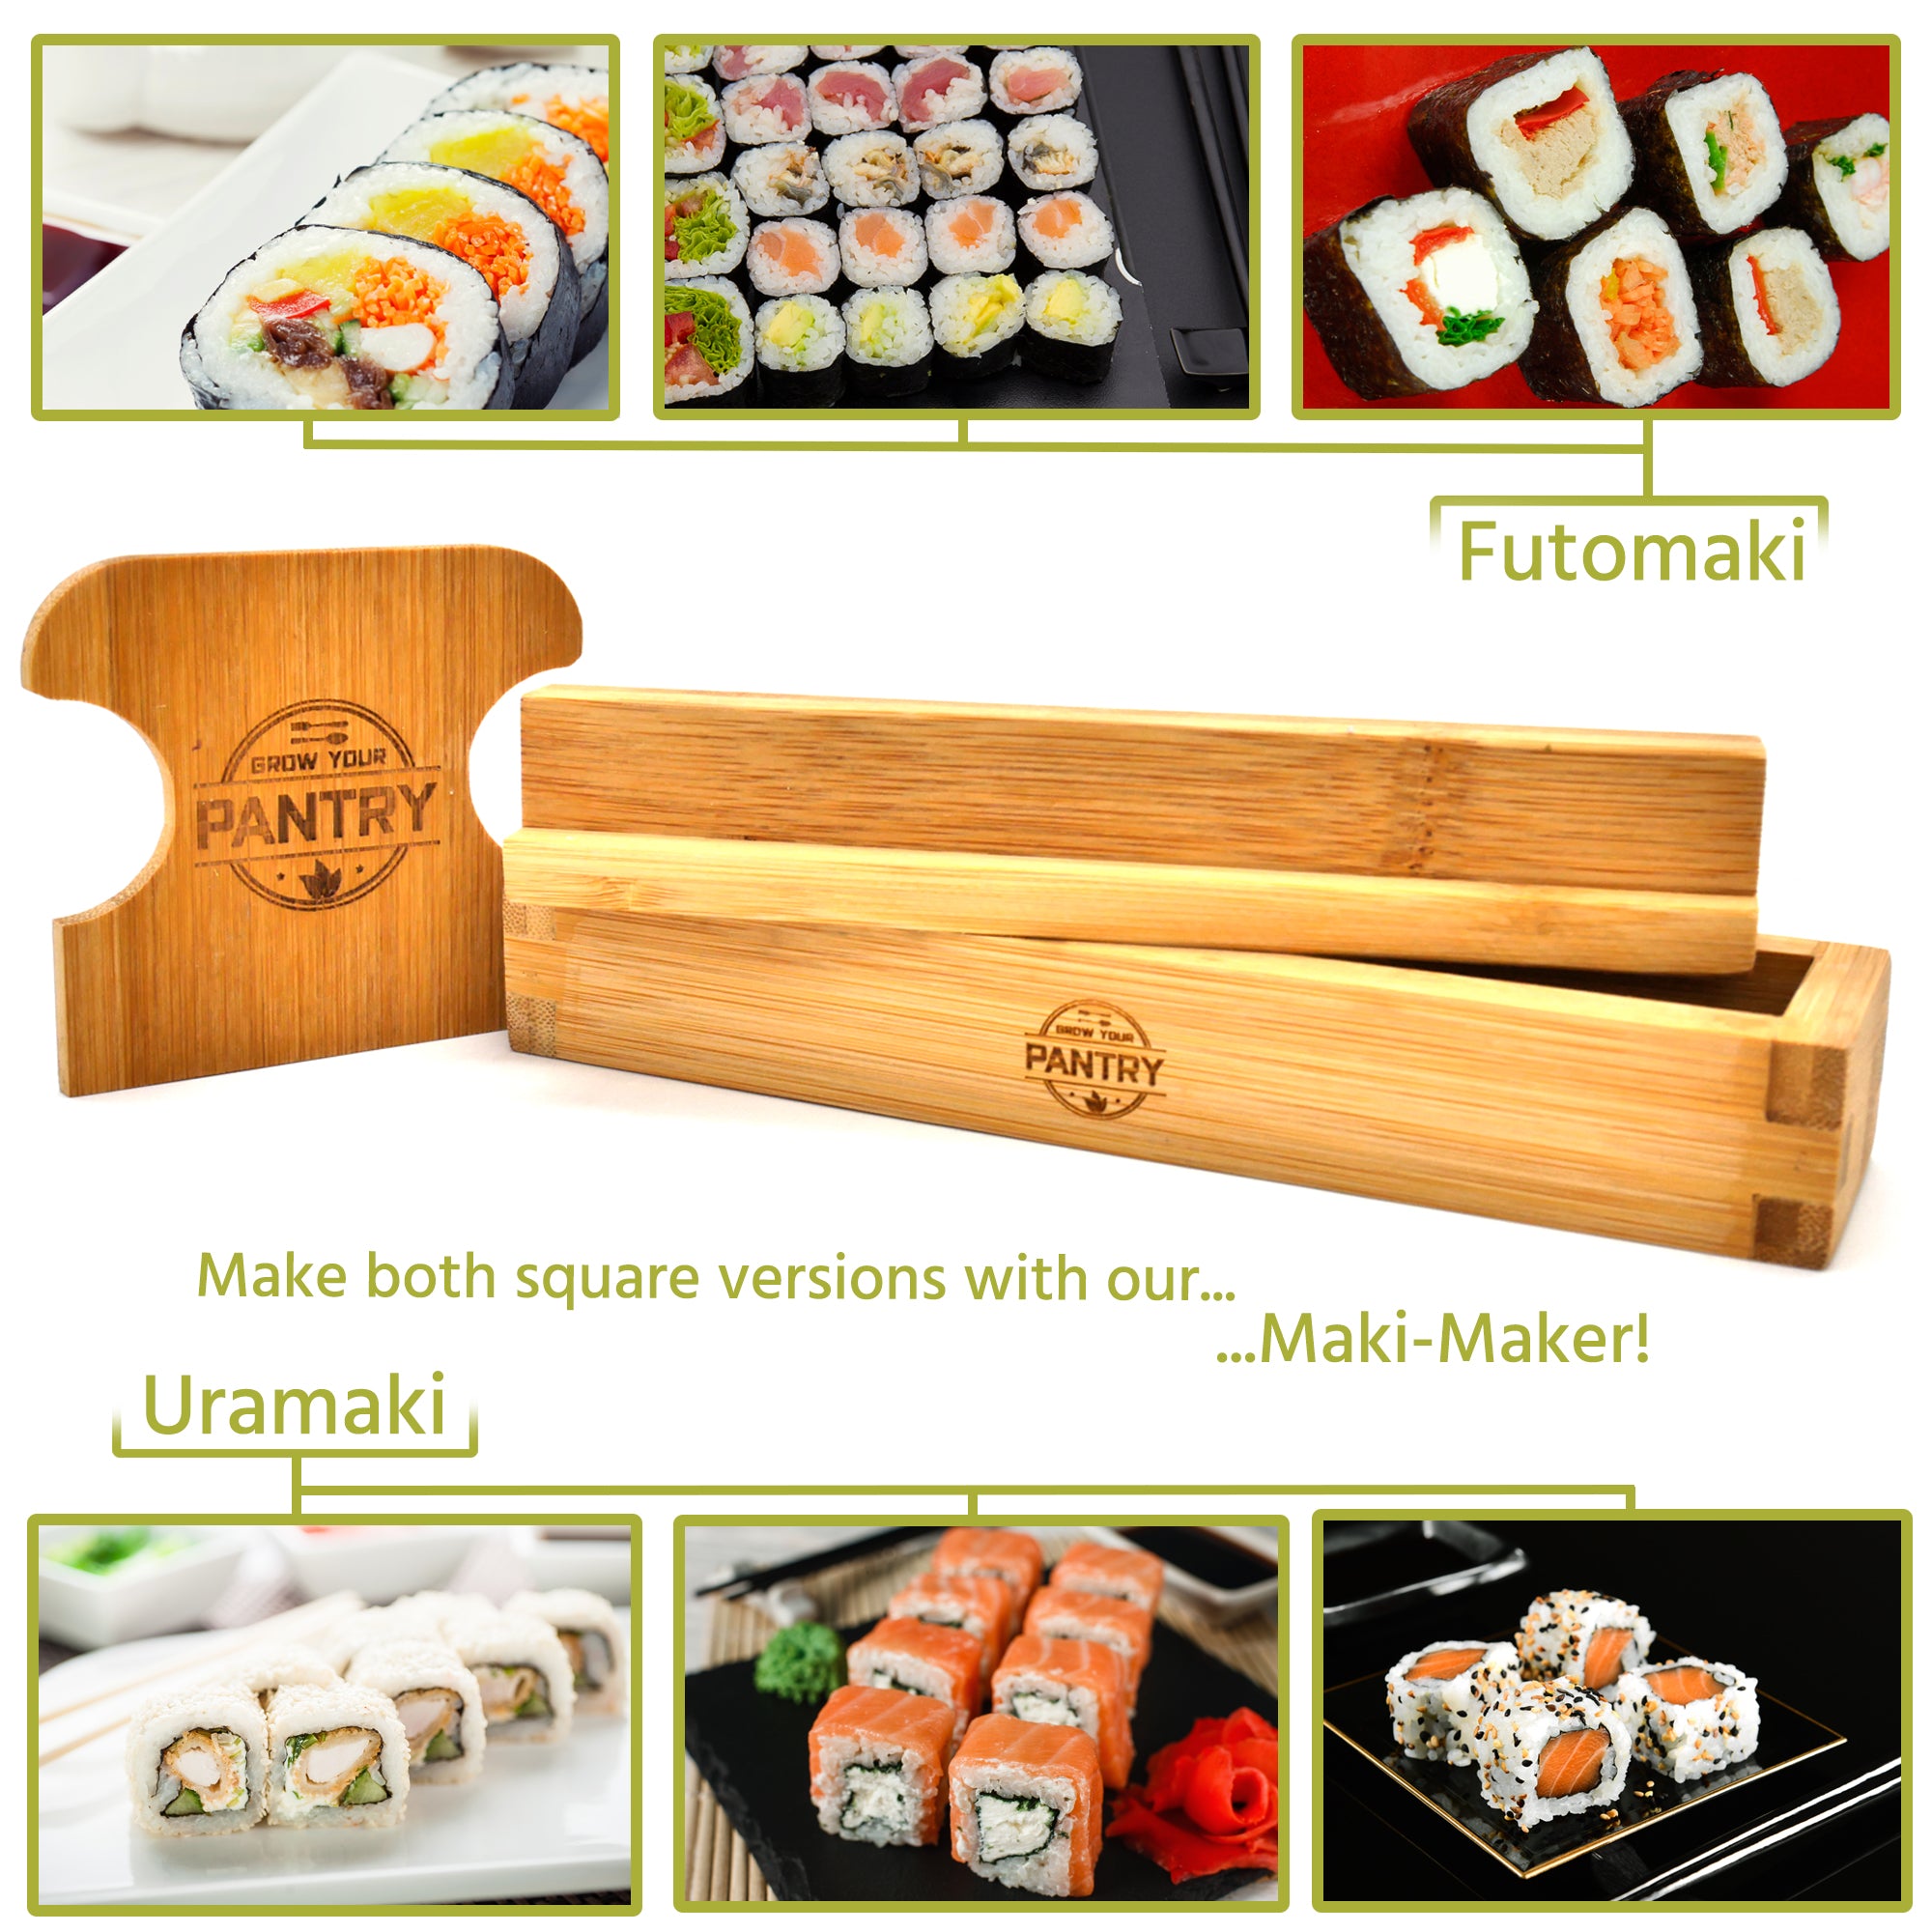 Bamboo Sushi and Maki Making Kit - With Bamboo Sushi Rolling Mat, Maki –  Grow Your Pantry